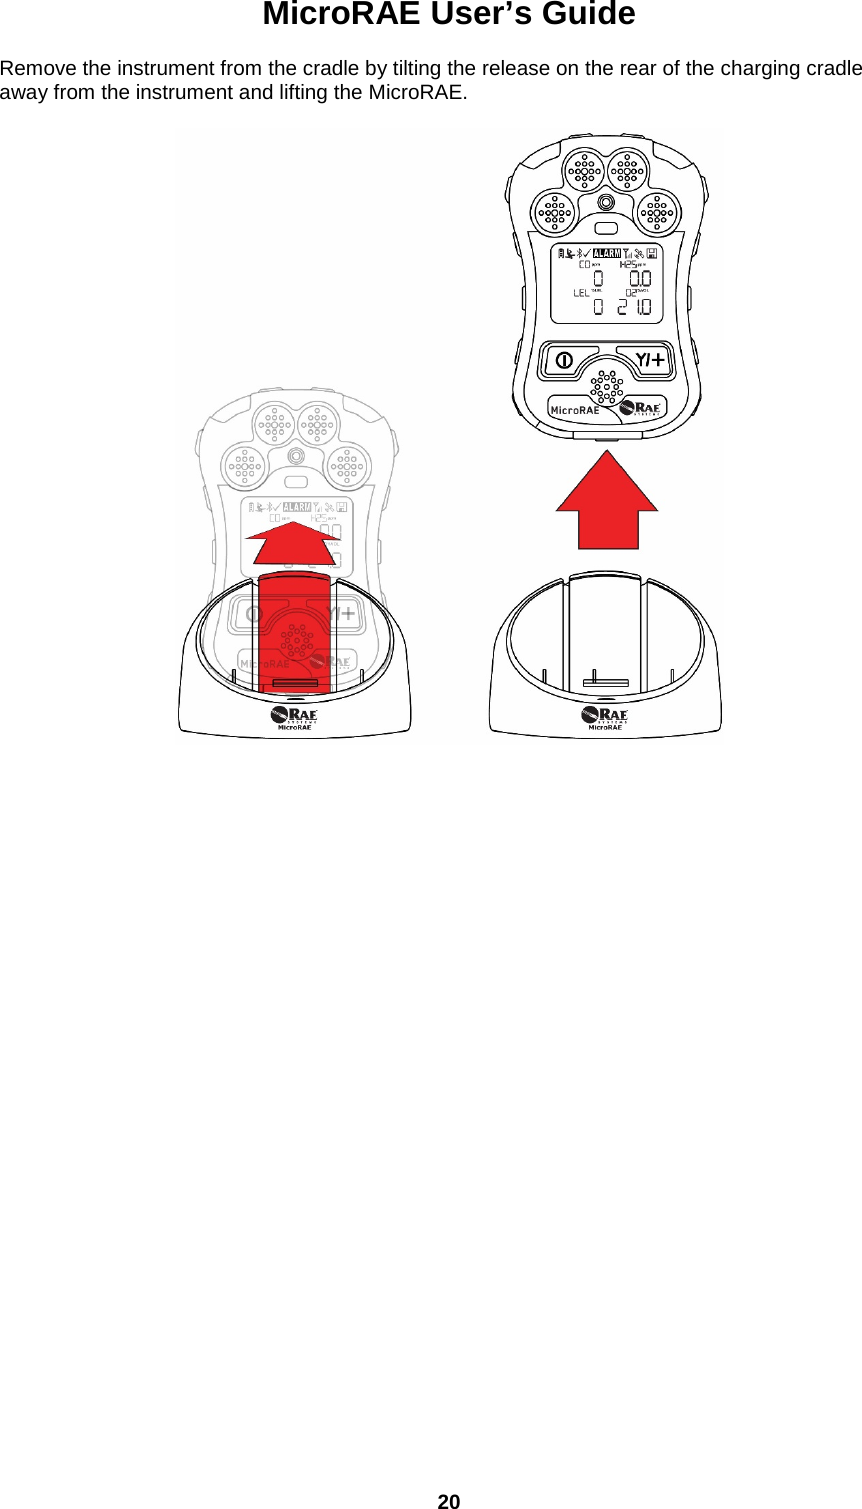 MicroRAE User’s Guide  20  Remove the instrument from the cradle by tilting the release on the rear of the charging cradle away from the instrument and lifting the MicroRAE.      